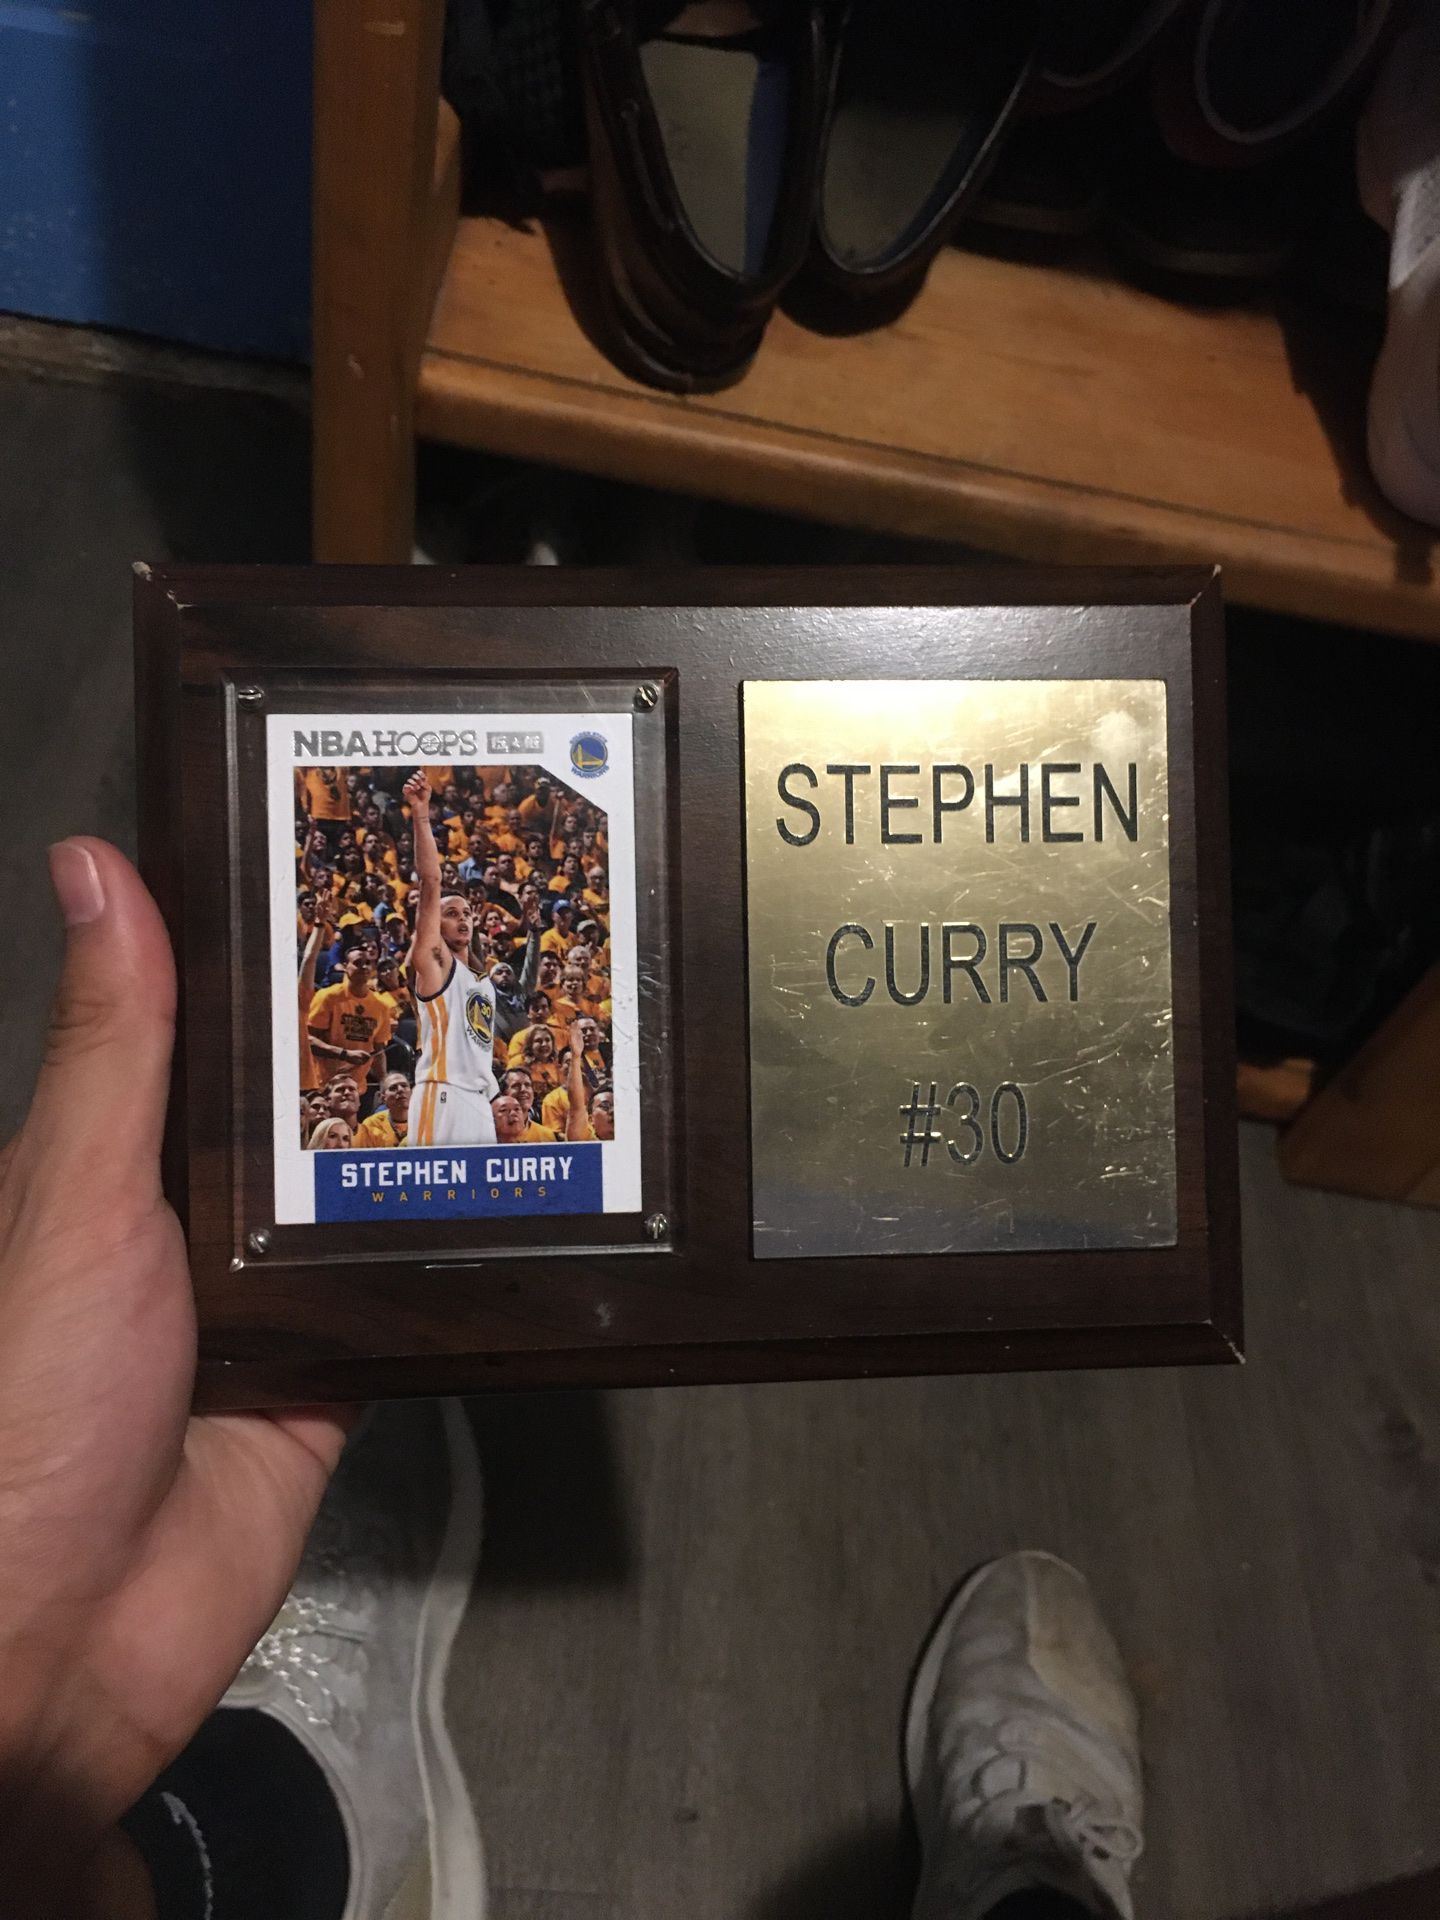 Stephen Curry plack